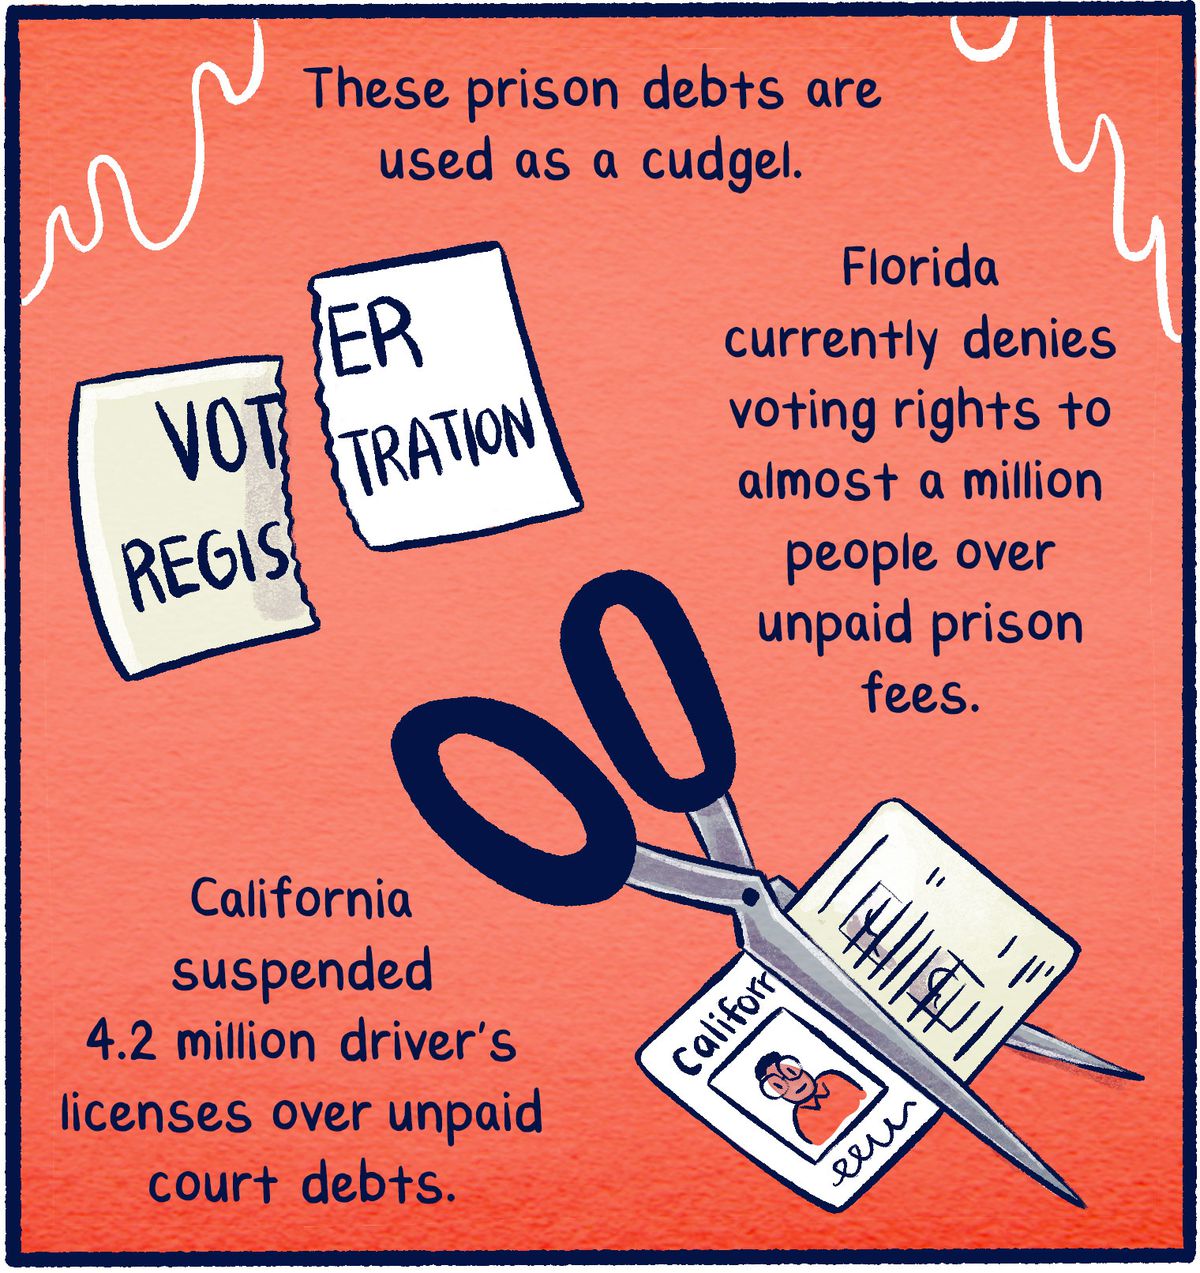 These prison debts are used as a cudgel. Florida currently denies voting rights to almost a million people over unpaid prison fees. California suspended 4.2 million drivers’ licenses over unpaid court debts.